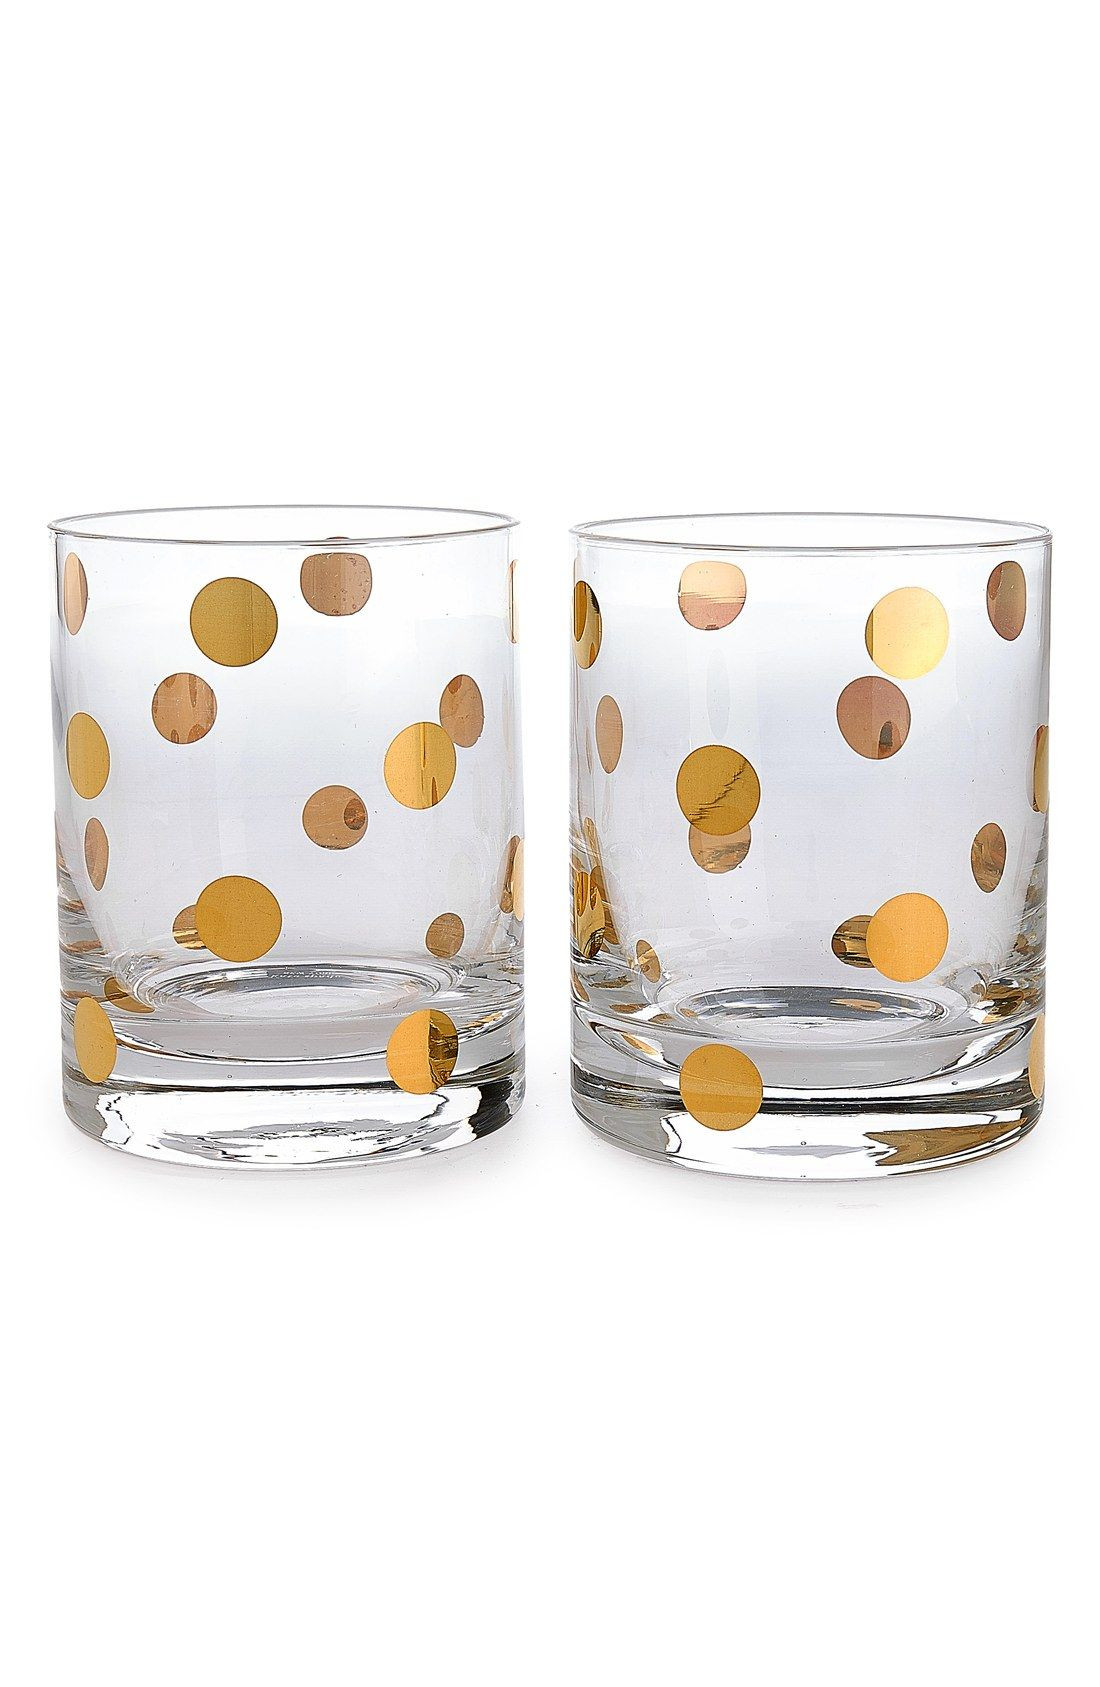 23 Amazing Kate Spade Dandy Lane Vase 2024 free download kate spade dandy lane vase of cute drinking glasses with gold polka dots womens accessories intended for cute drinking glasses with gold polka dots